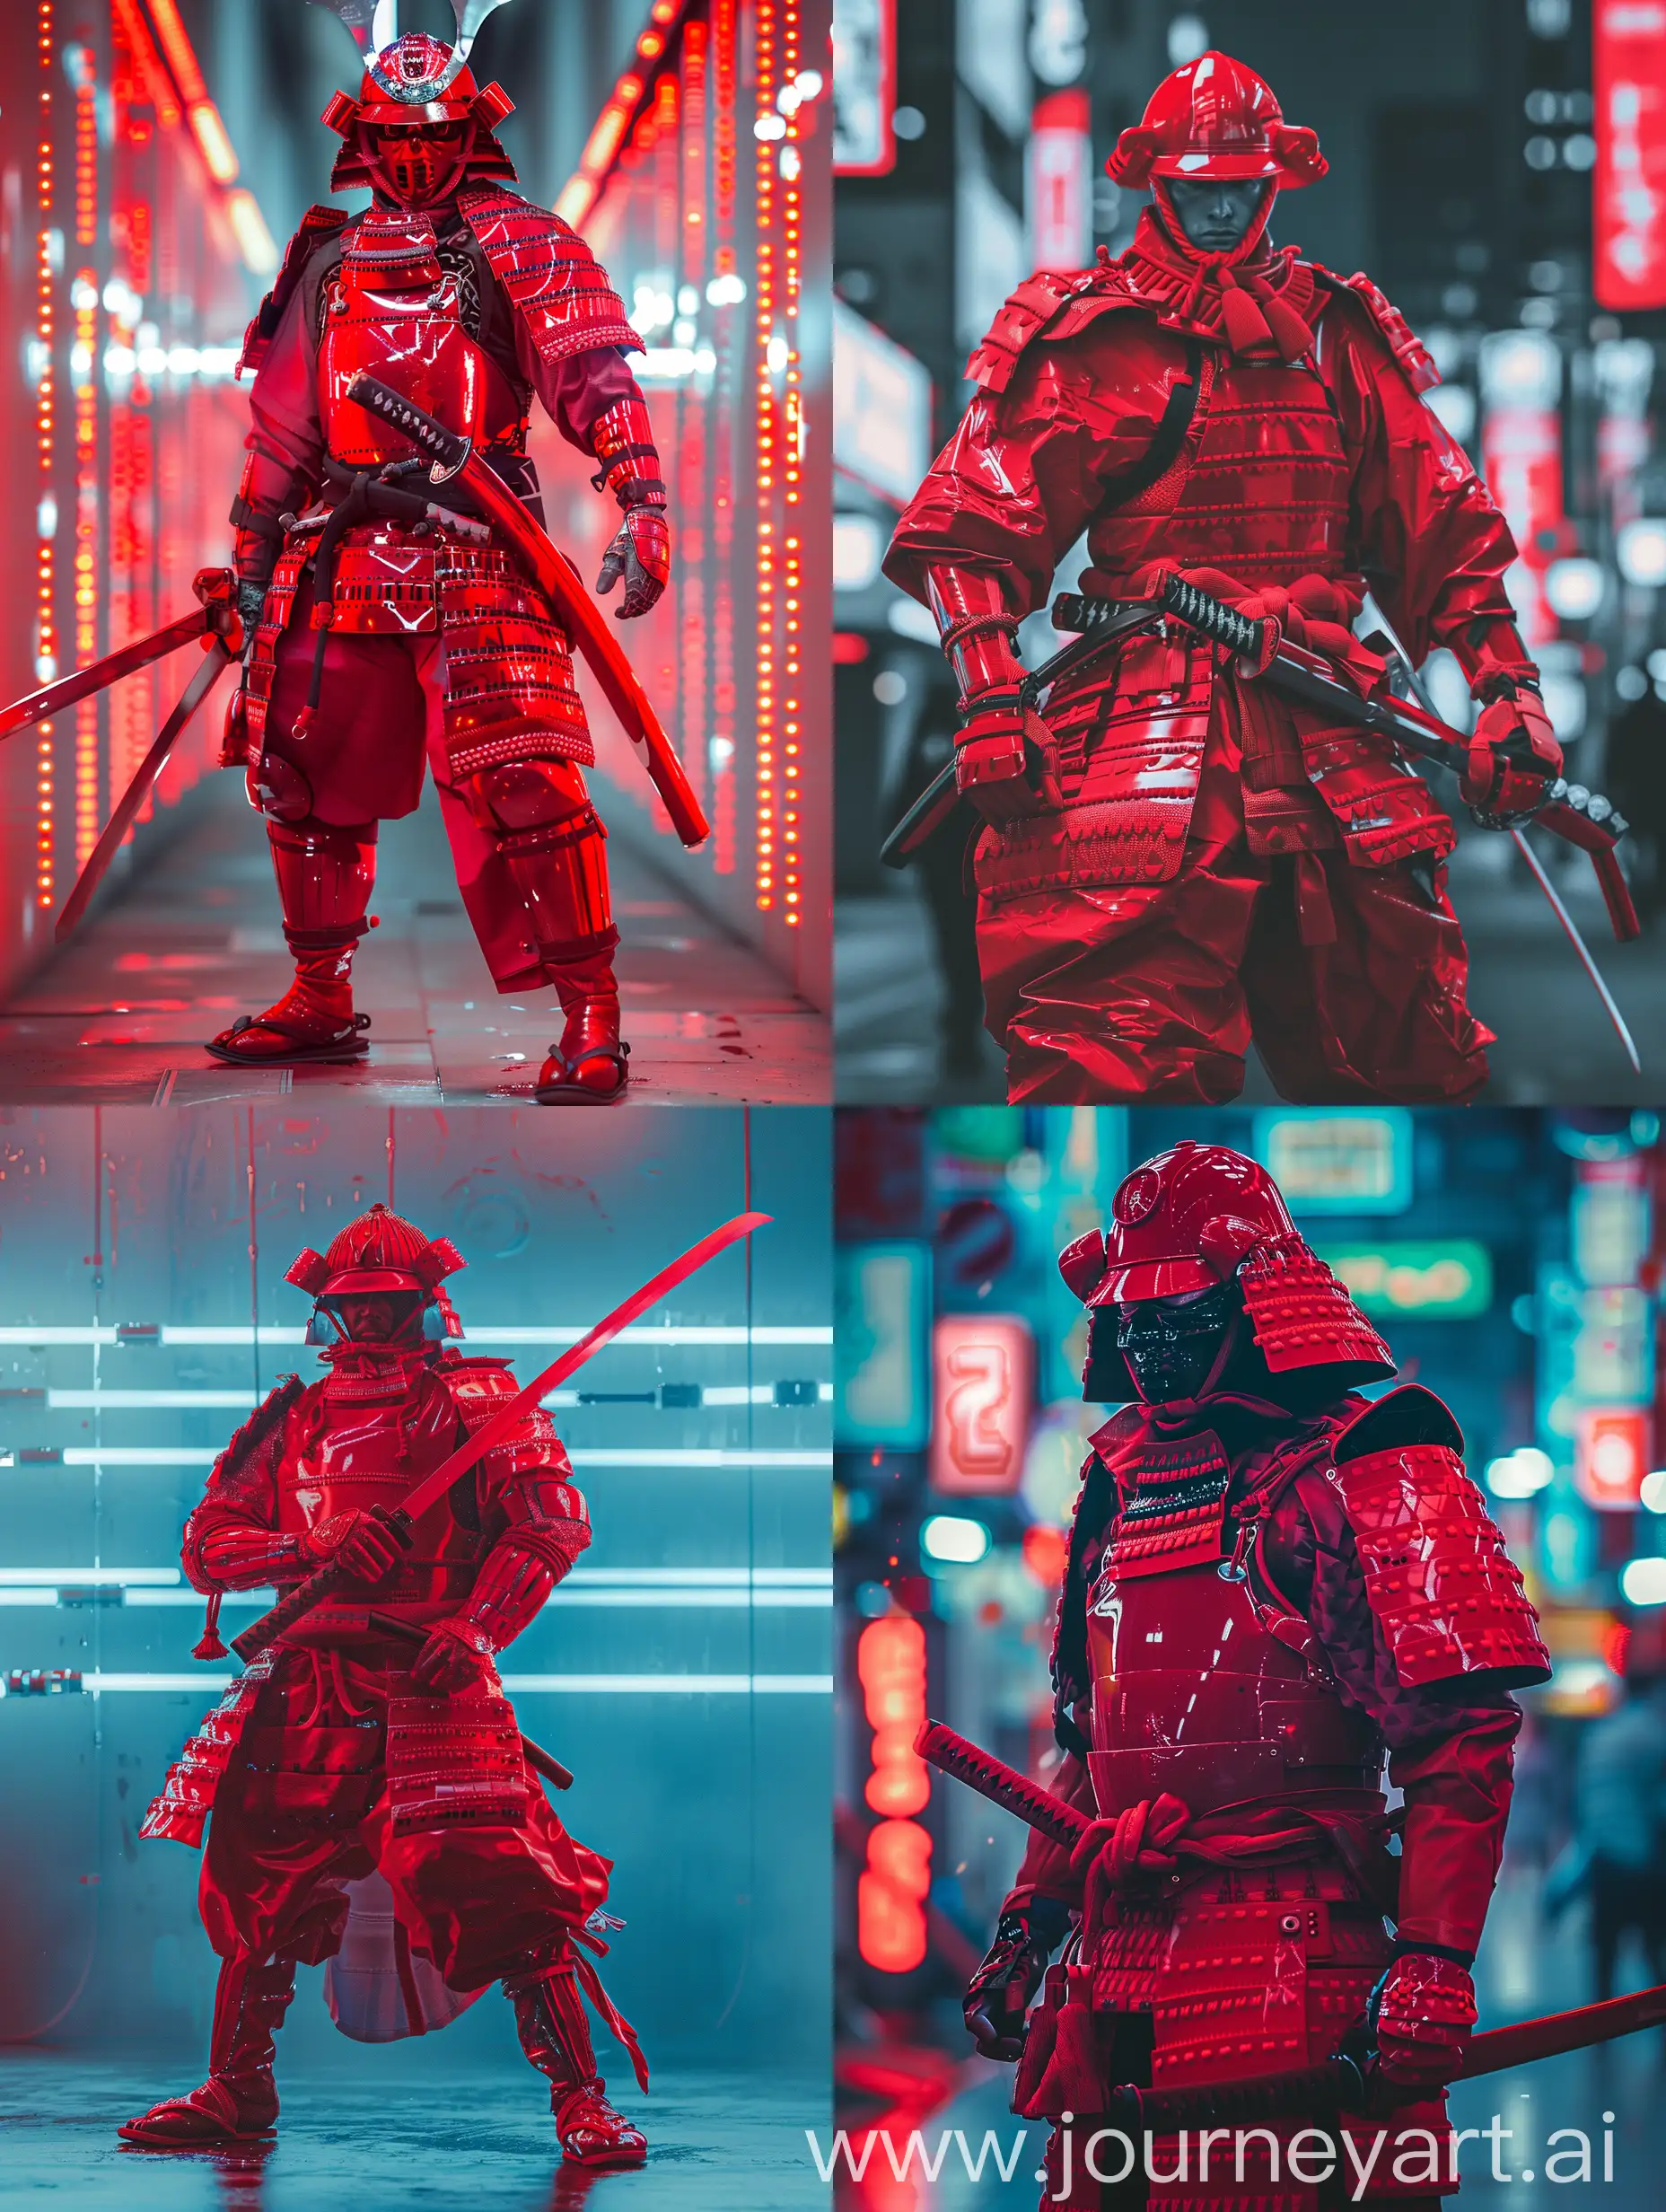 In an urban setting bathed in fluorescent lights, behold the striking figure of an Urban Samurai. Donning a red armor inspired by samurais, this warrior epitomizes a synthesis of the ancient and the future. His attire, a fusion of samurai tradition and Japanese techwear, captivates with its unique elegance. The vibrant hues of red in his armor, reminiscent of traditional samurai garb, stand out against the solid backdrop. Wielding a samurai sword with skill, he traverses the urban landscape with impressive grace, his movements reflecting a harmony between past and present. As he navigates the neon-lit streets, he exudes an aura of strength and confidence, embodying the spirit of a contemporary Urban Samurai.